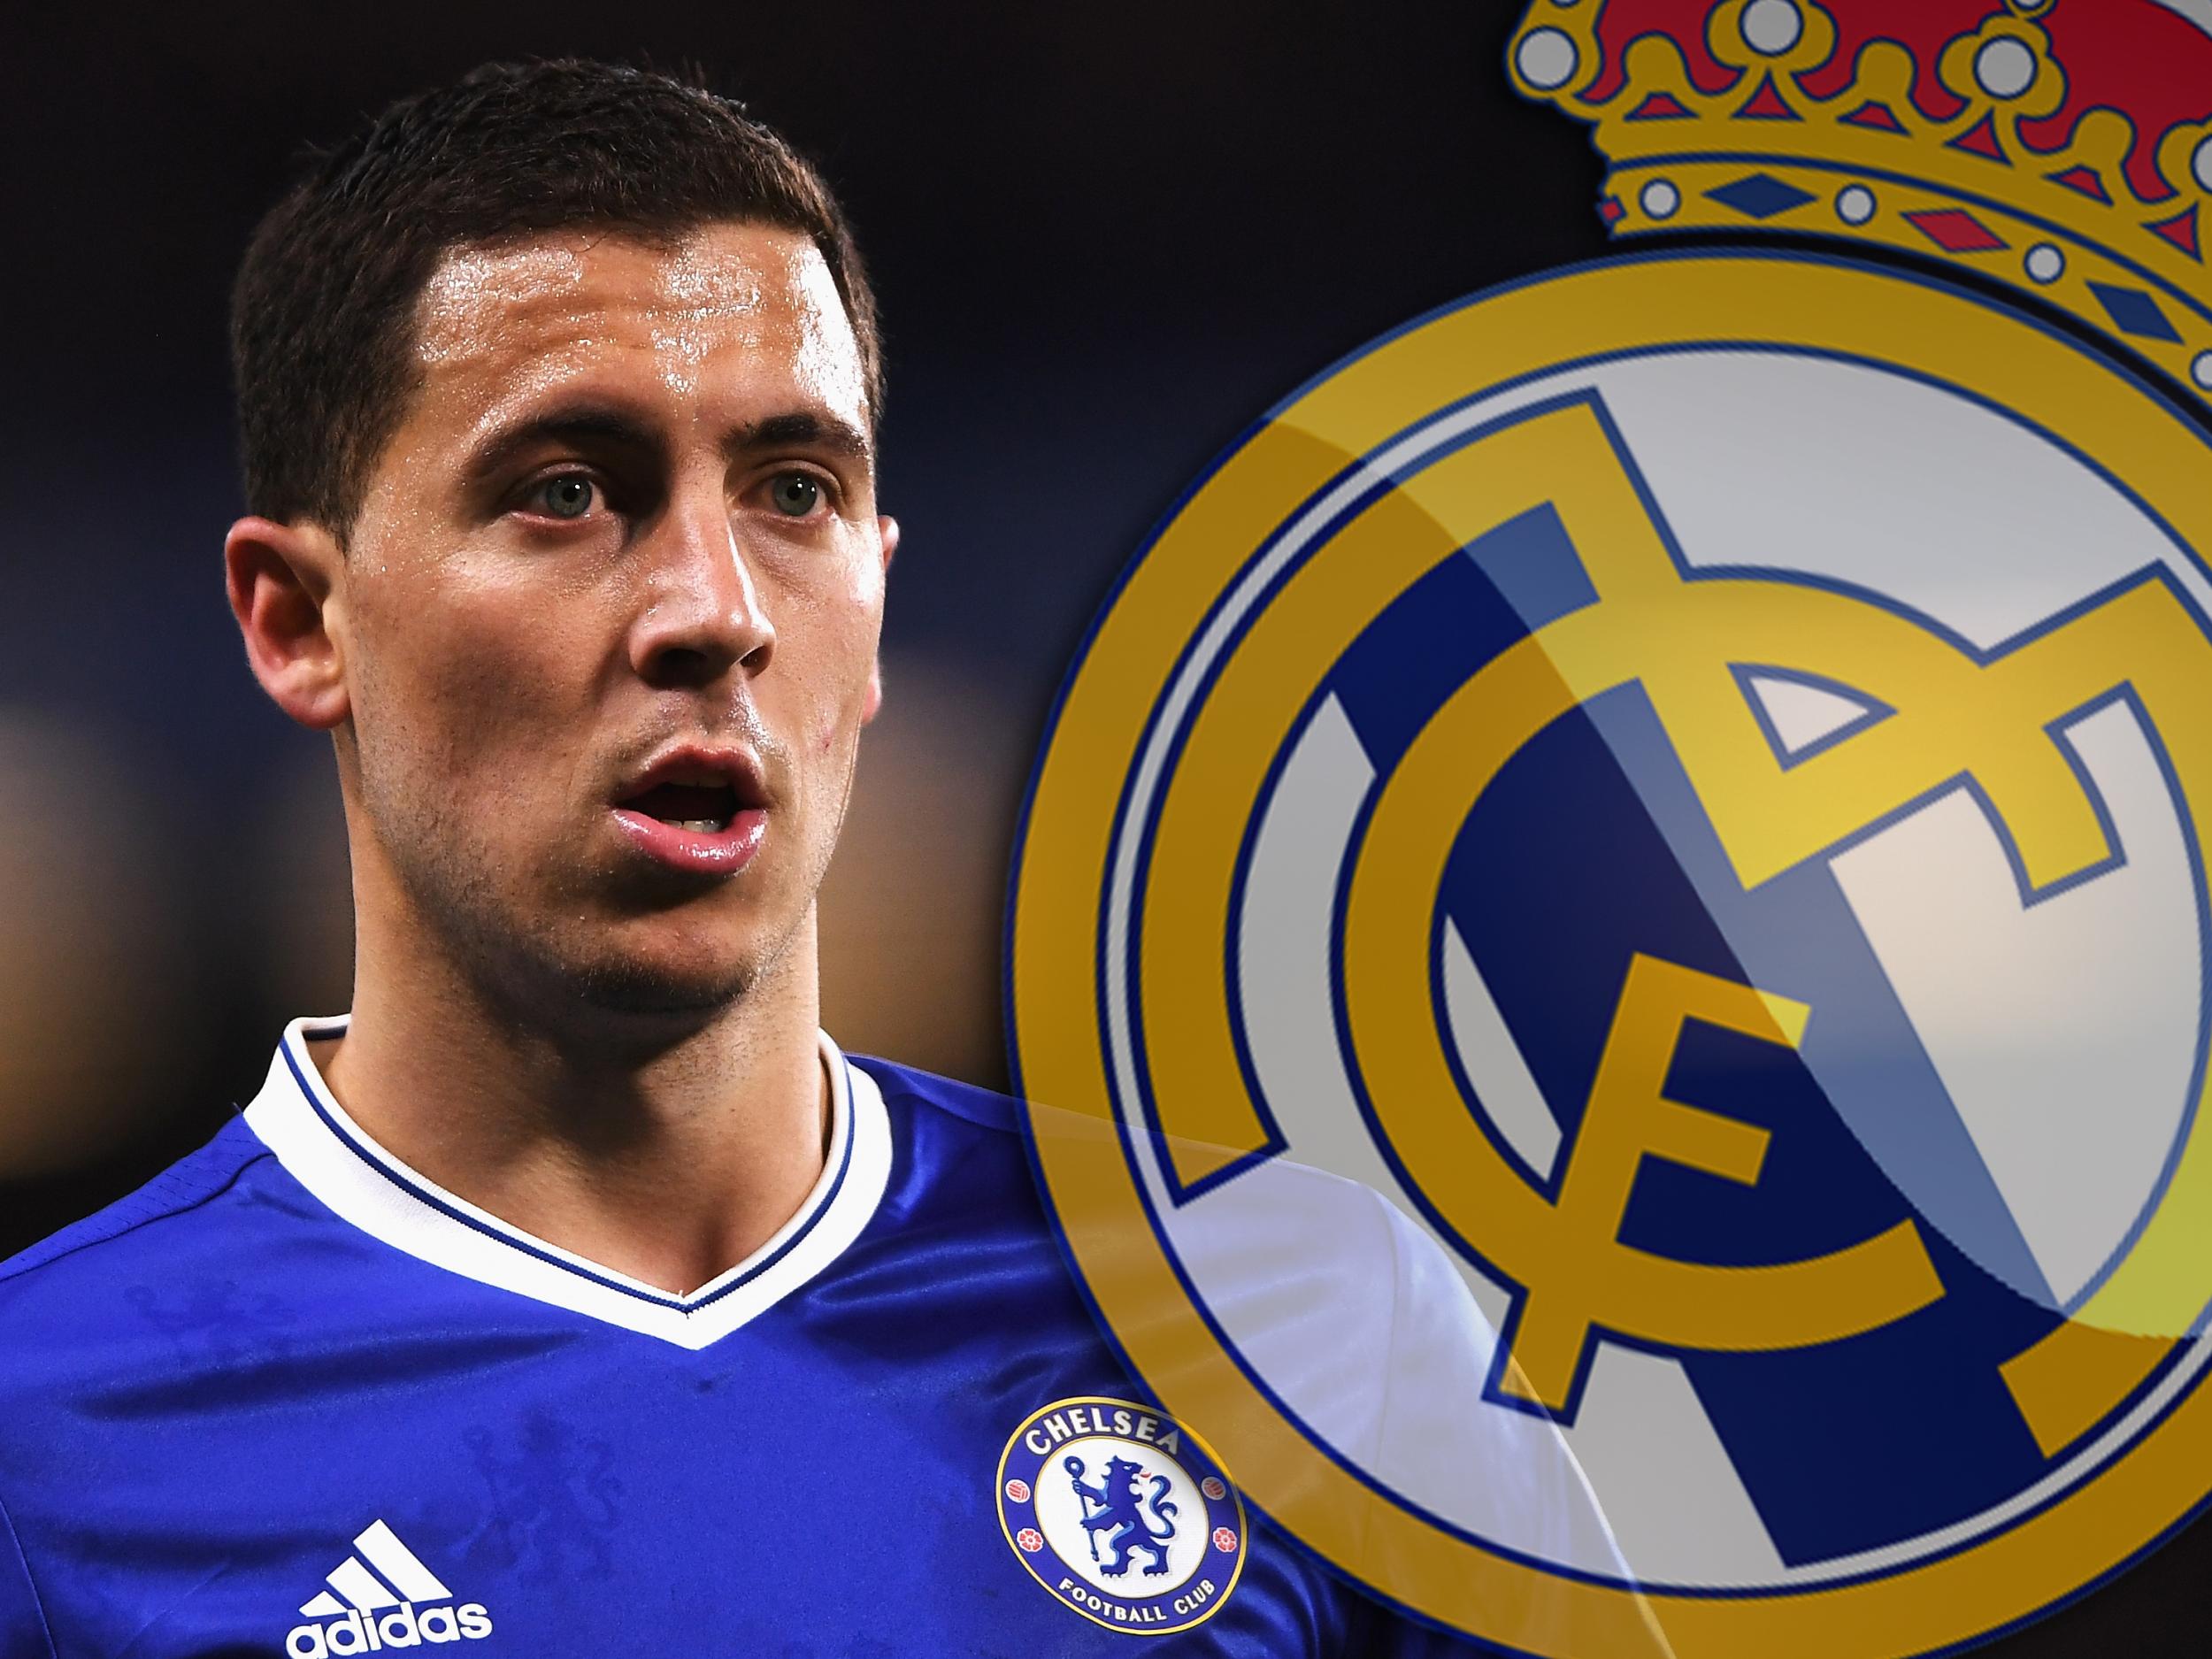 Eden Hazard has been linked with a summer move to Real Madrid